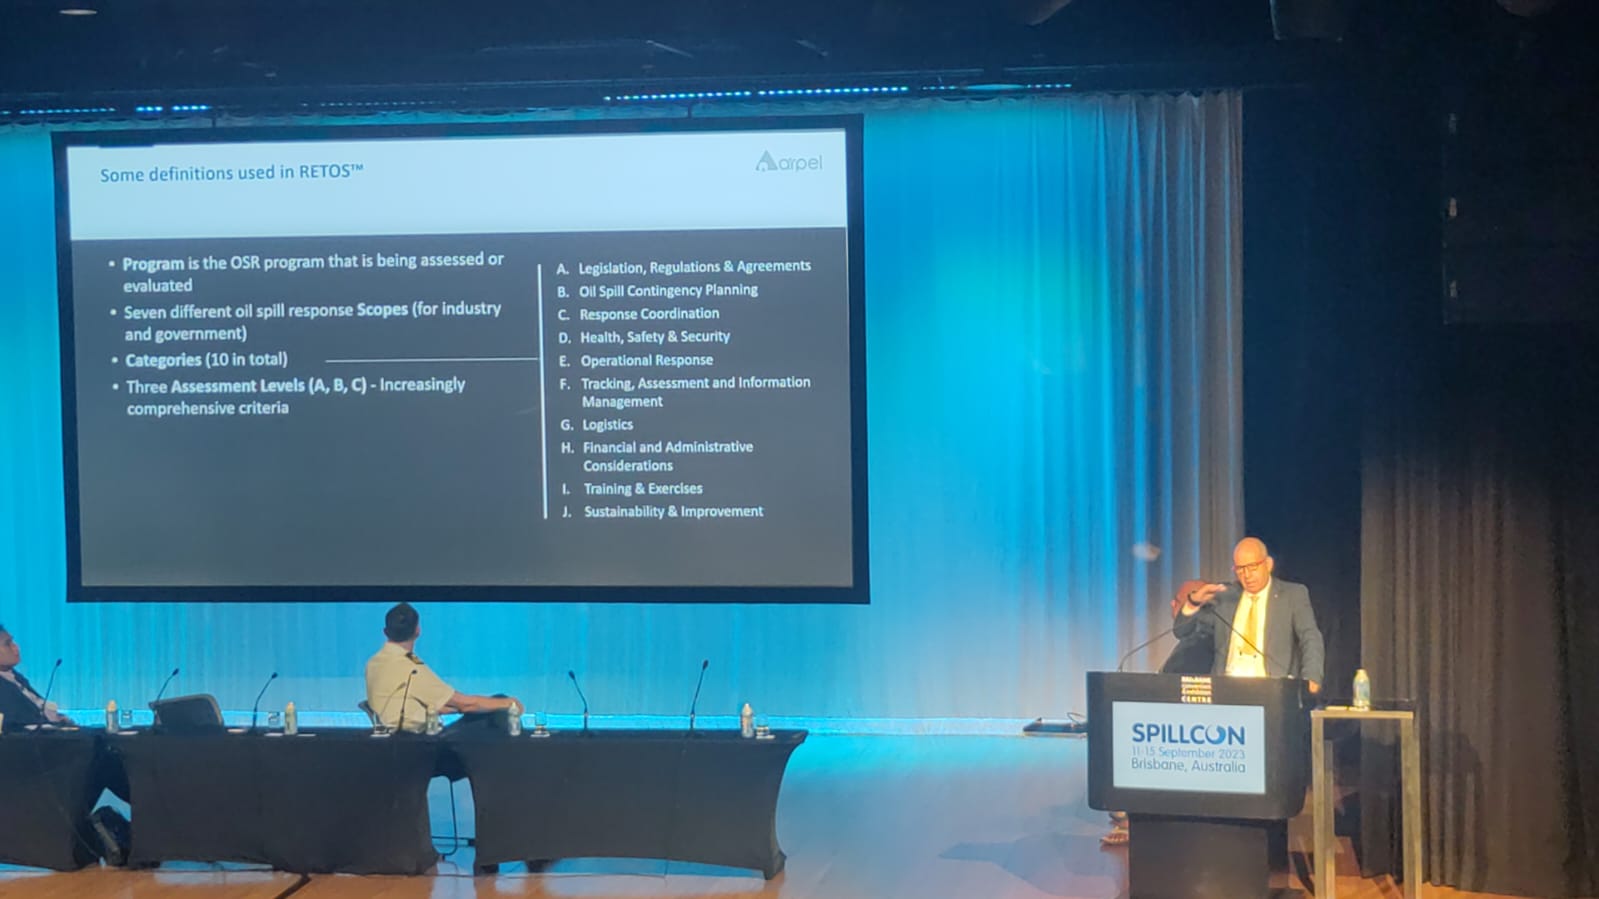 Presentation of RETOS™ at Spillcon 2023 in Australia and at Slom Conference In Brazil